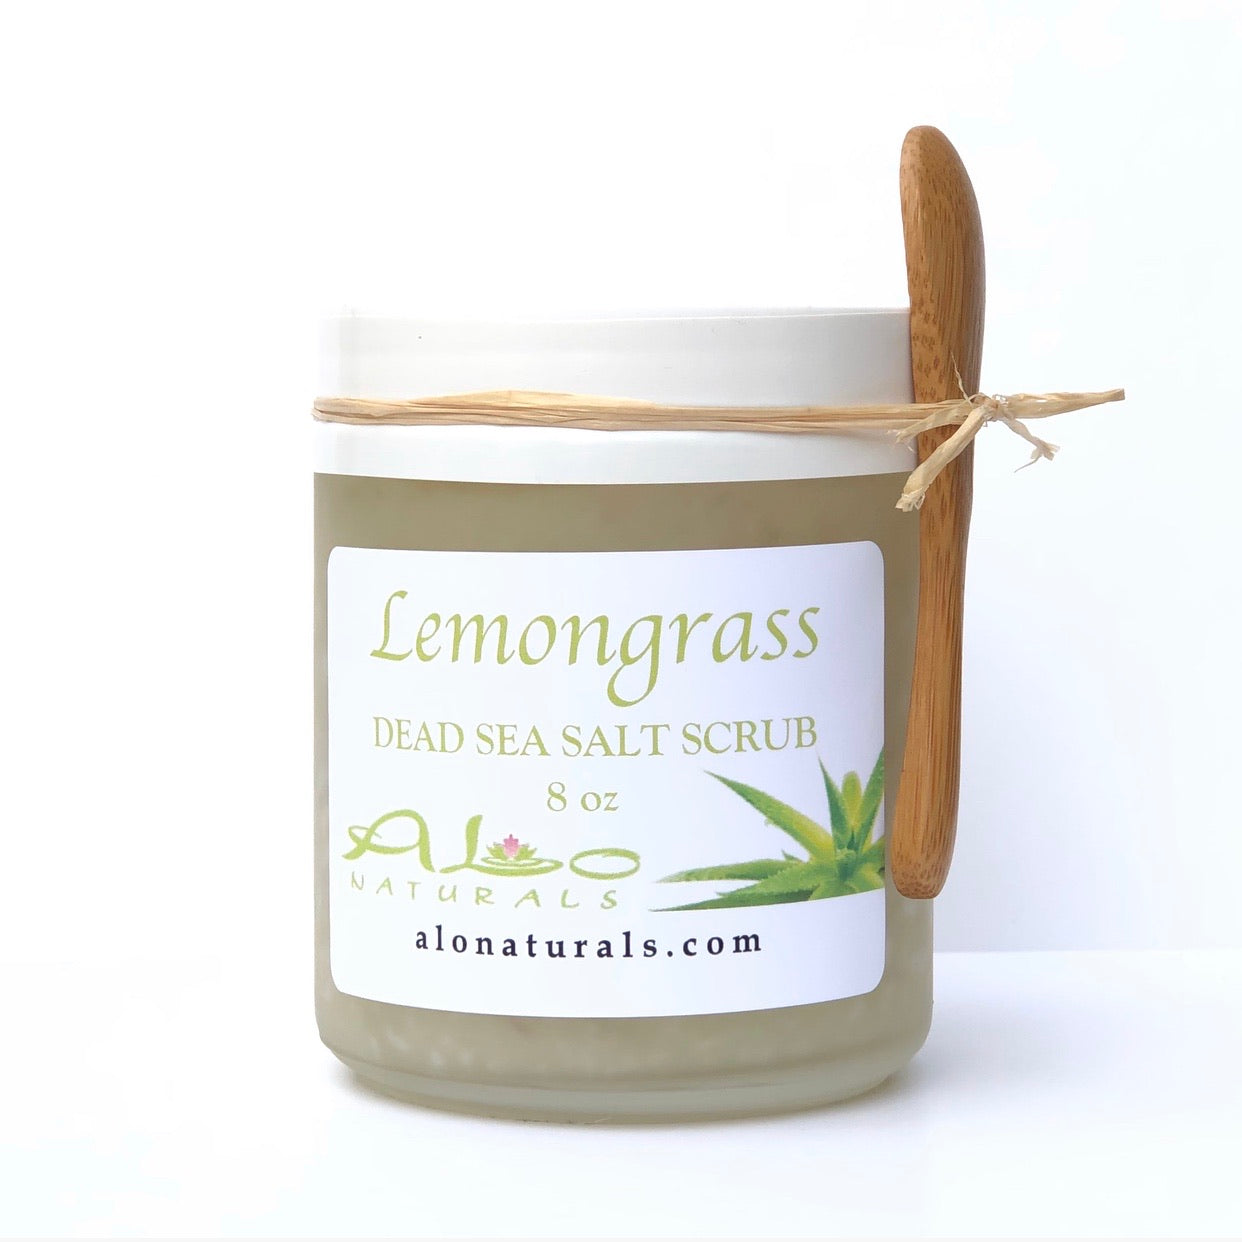 Lemongrass oil is known to enhance skin texture, cleanse and detoxify skin and pours, and eliminate excess oil from the skin. Dead Sea salt has been used for centuries to promote health and wellness, treat minor skin disorders, detoxify the body, aid in anti-aging, and improve blood circulation which promotes healing and renewal. This salt has a lower sodium content than regular sea salt which balances minerals that feed and nourish the skin and body.  8 ounce jar.  Includes bamboo spoon.